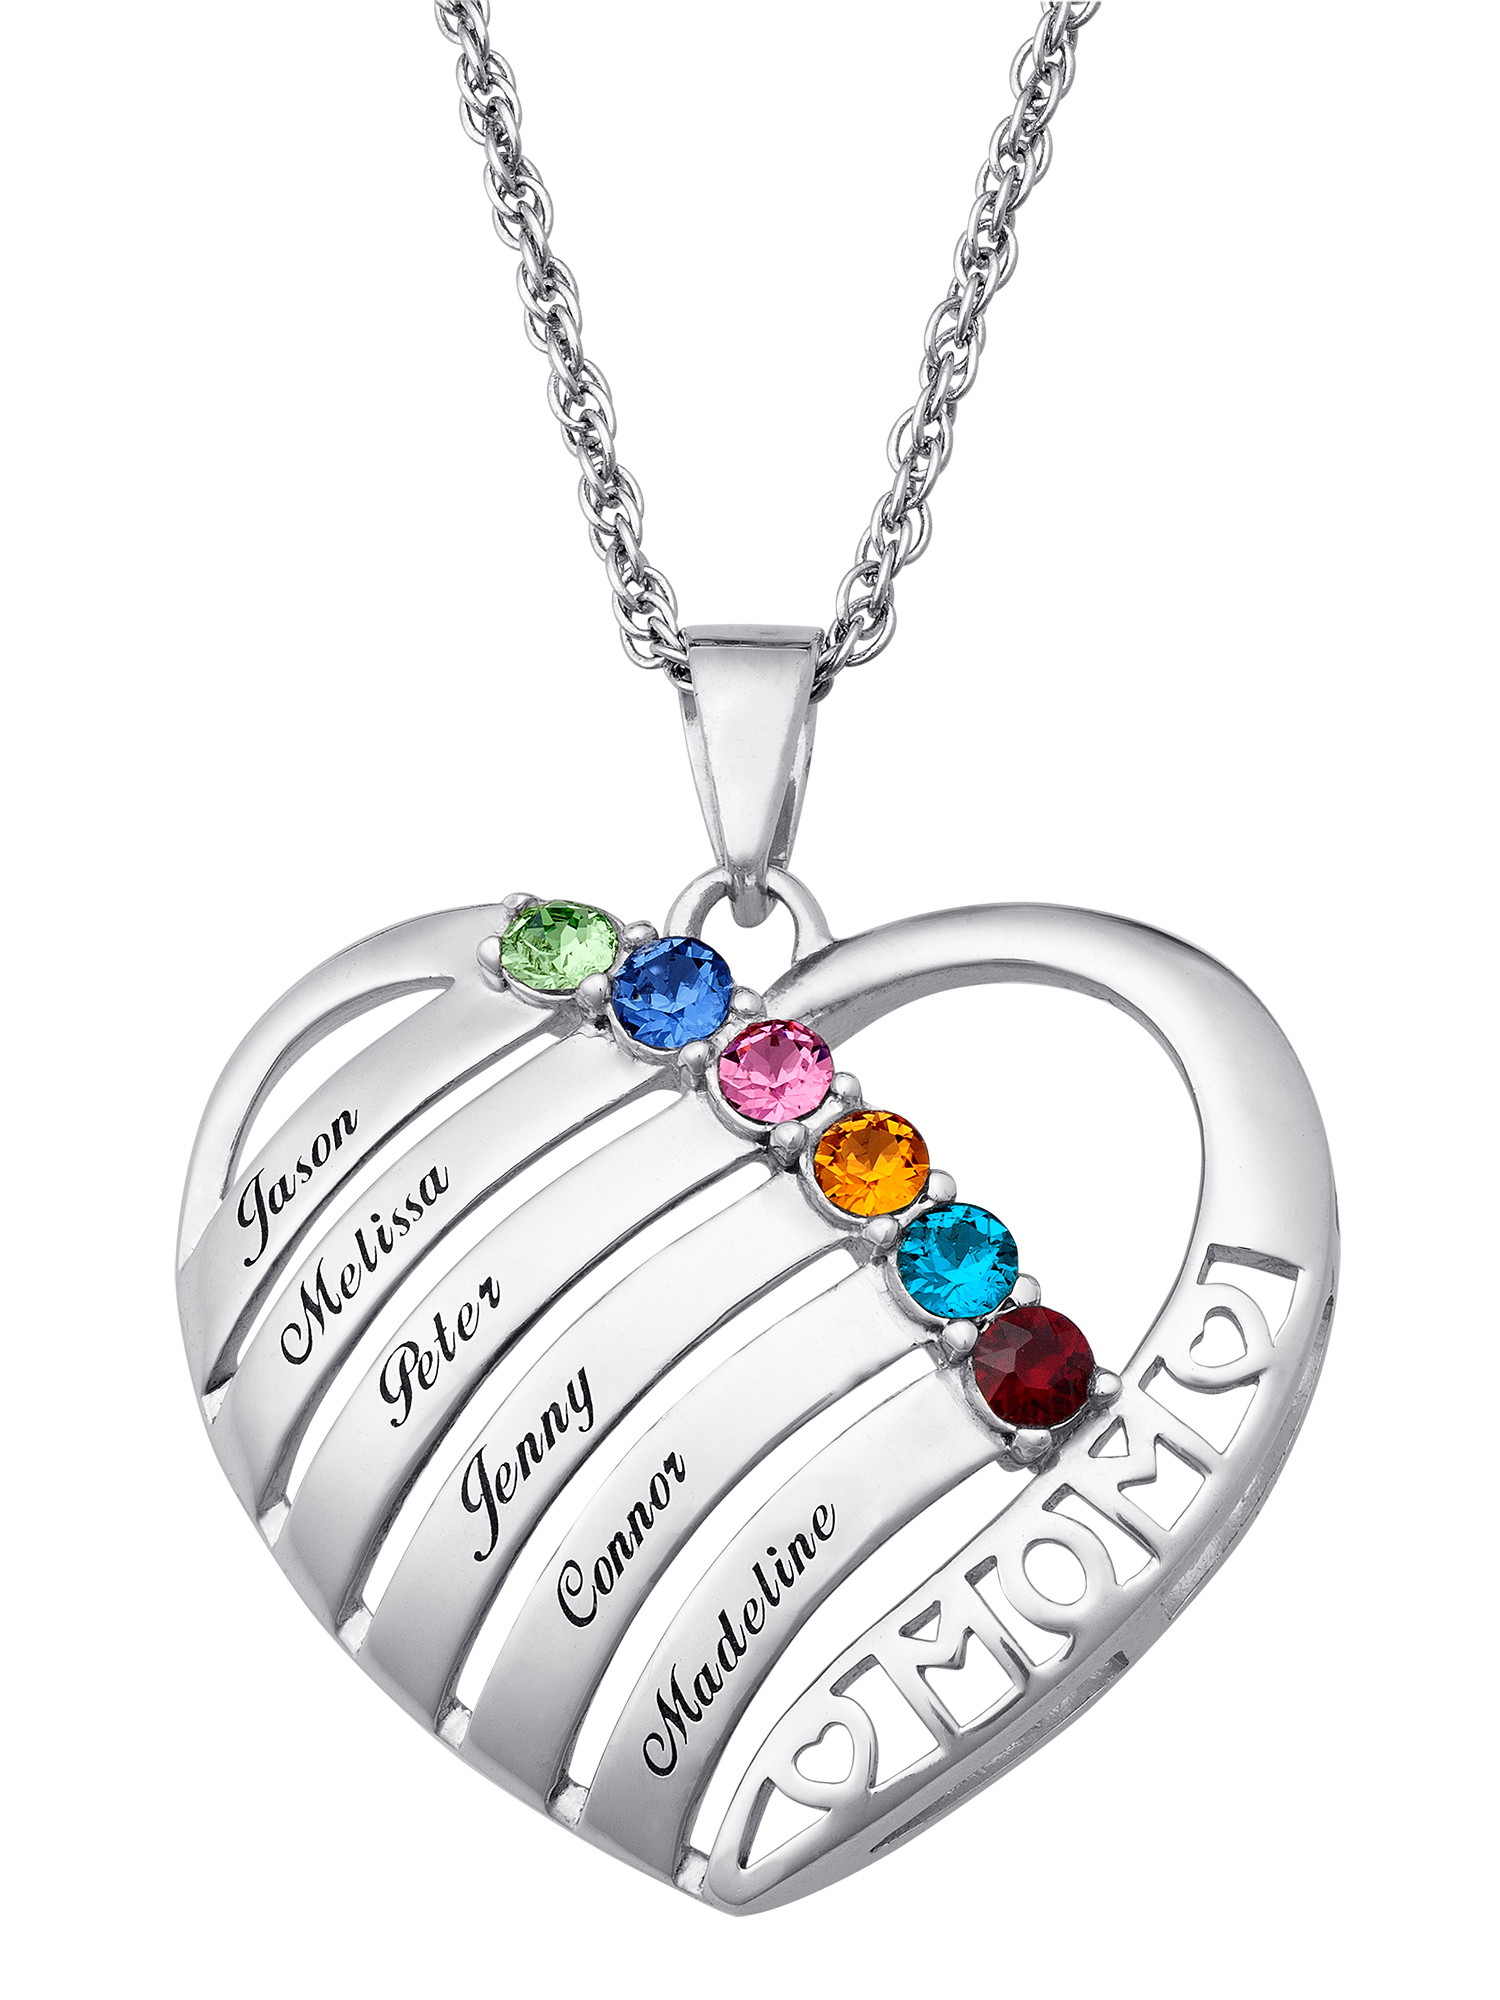 Family Jewelry Personalized Planet Mother's Mother Birthstone & Name Heart Necklace, 20" ,Women's - image 1 of 6